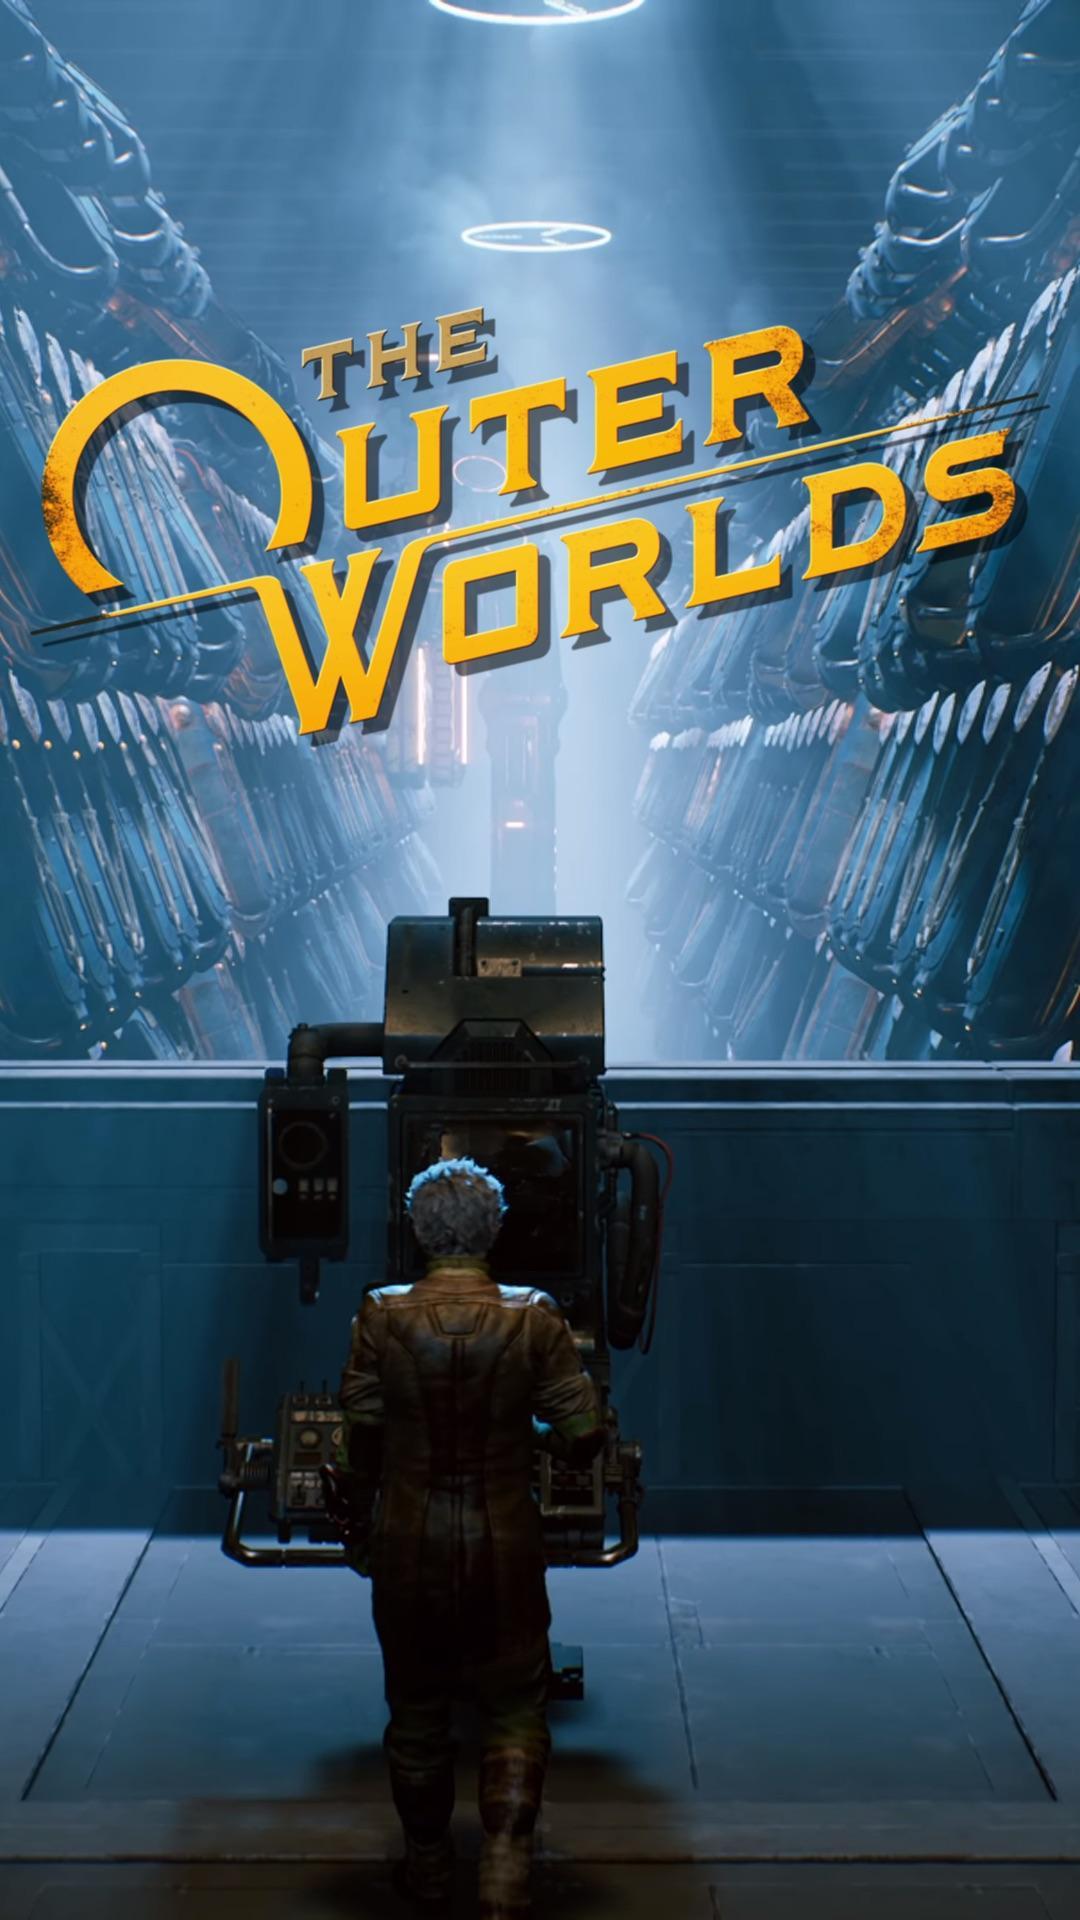 OC) Second Outer Worlds Phone Wallpaper